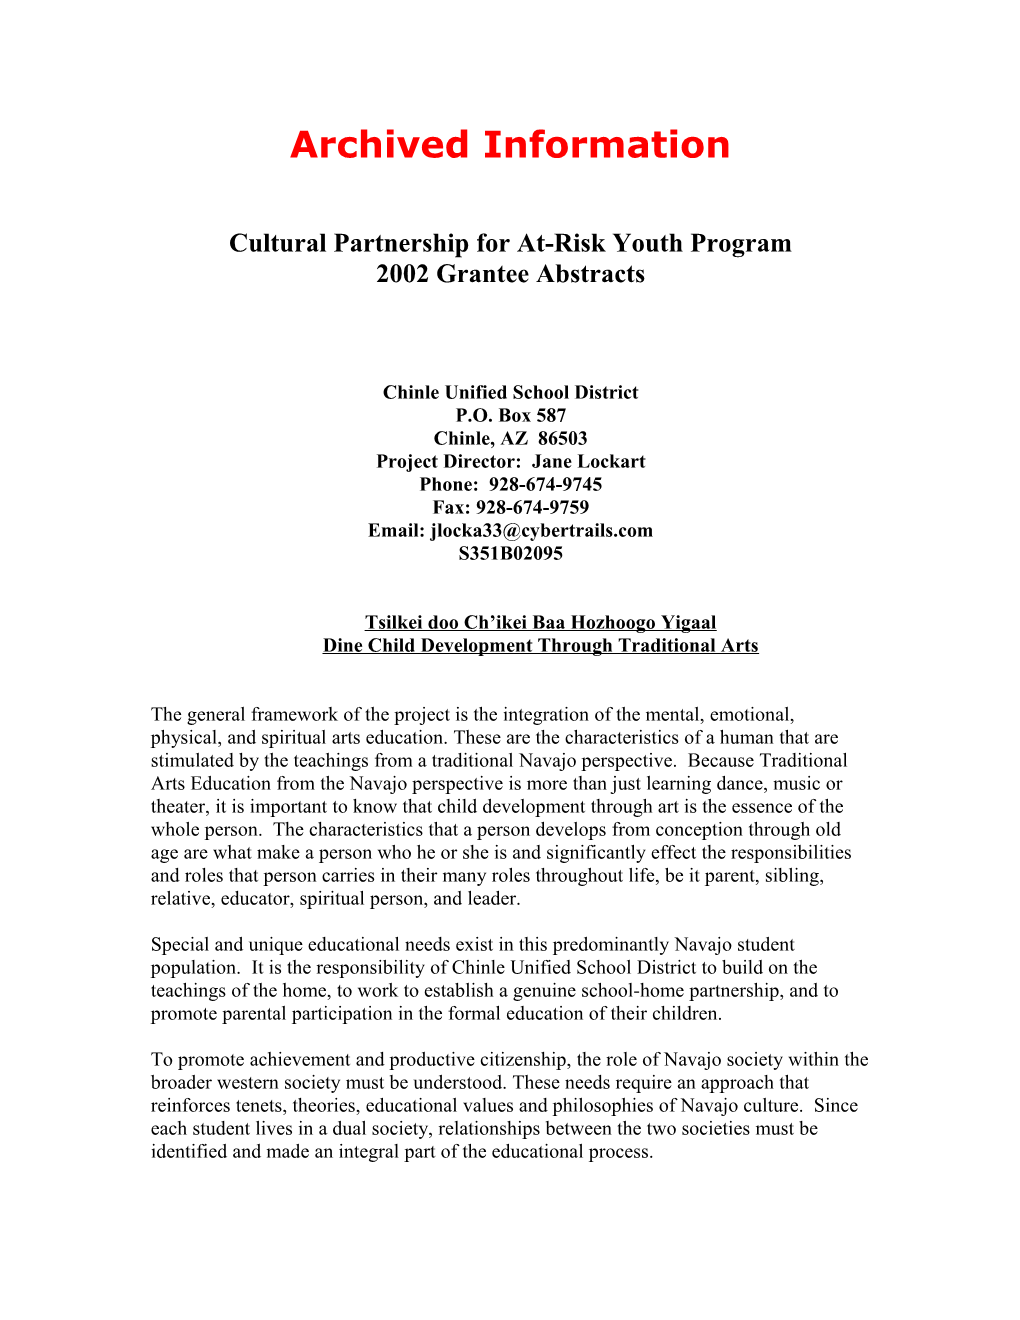 Archived Information: 2002 Cultural Partnership for At-Risk Youth Program Abstracts (MS Word)